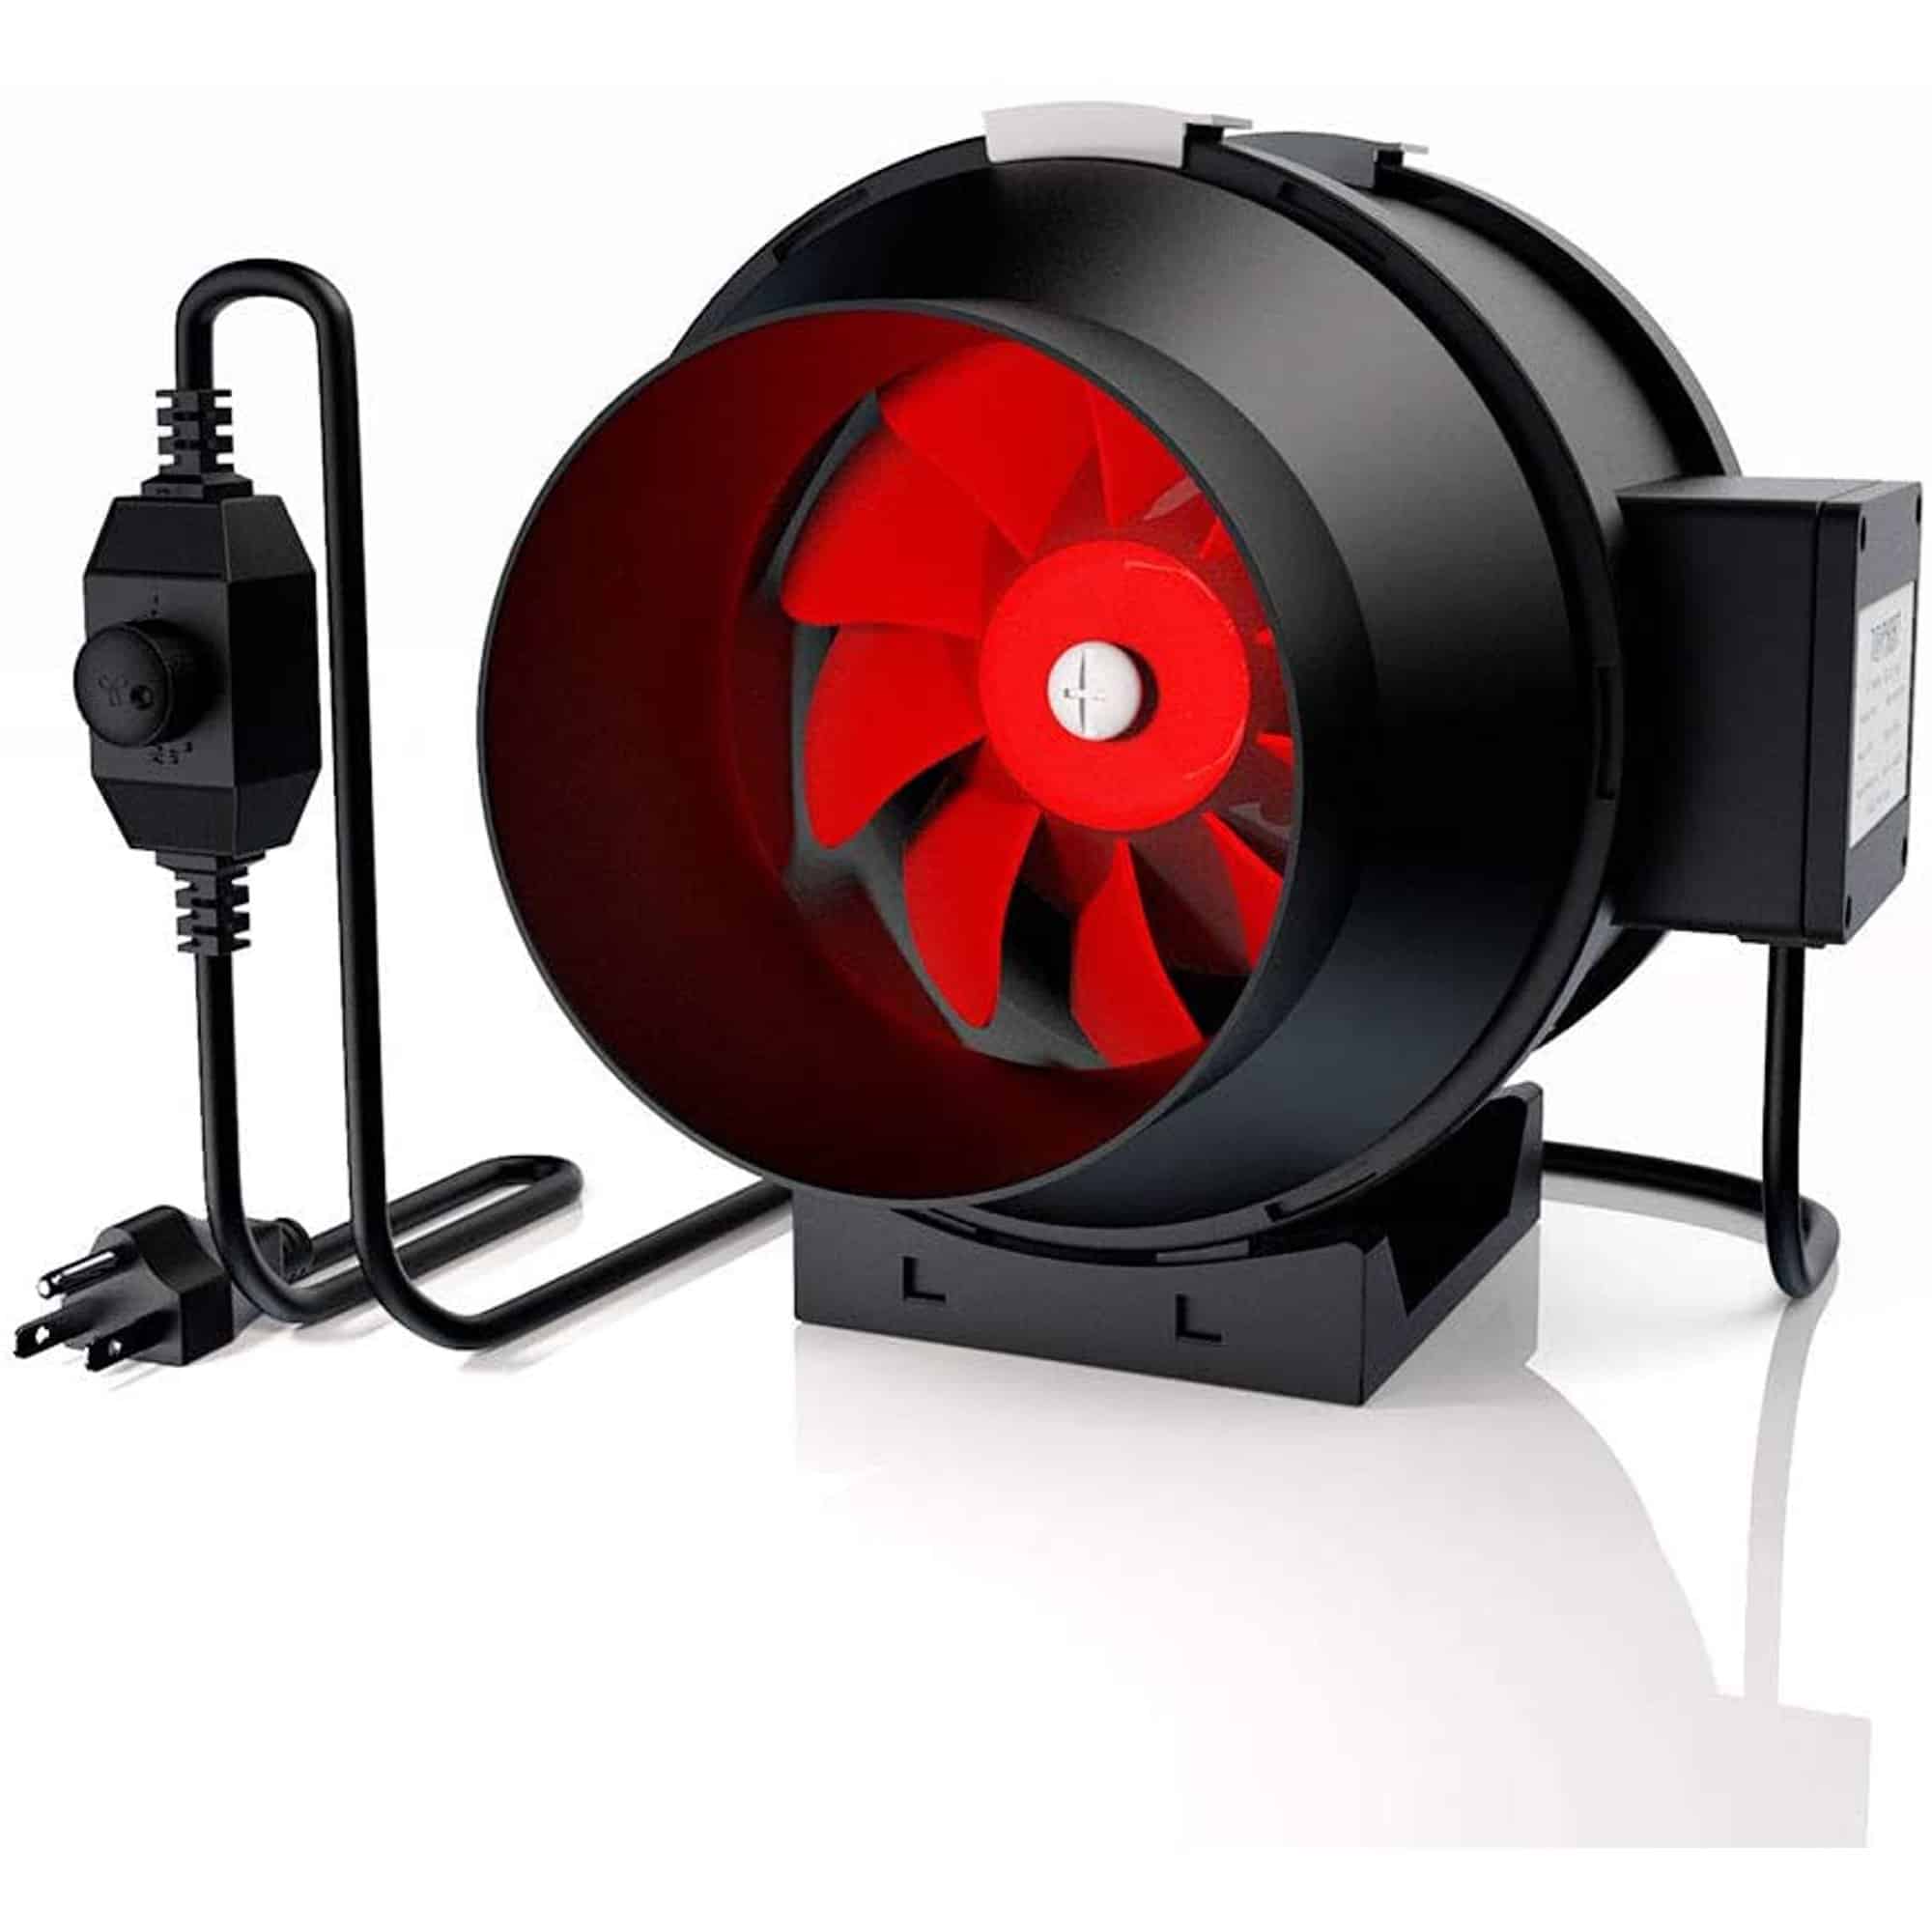 TOPHORT Inline Duct Fan With Variable Speed Controller - Best Exhaust Fan For 3x3 Grow Tent